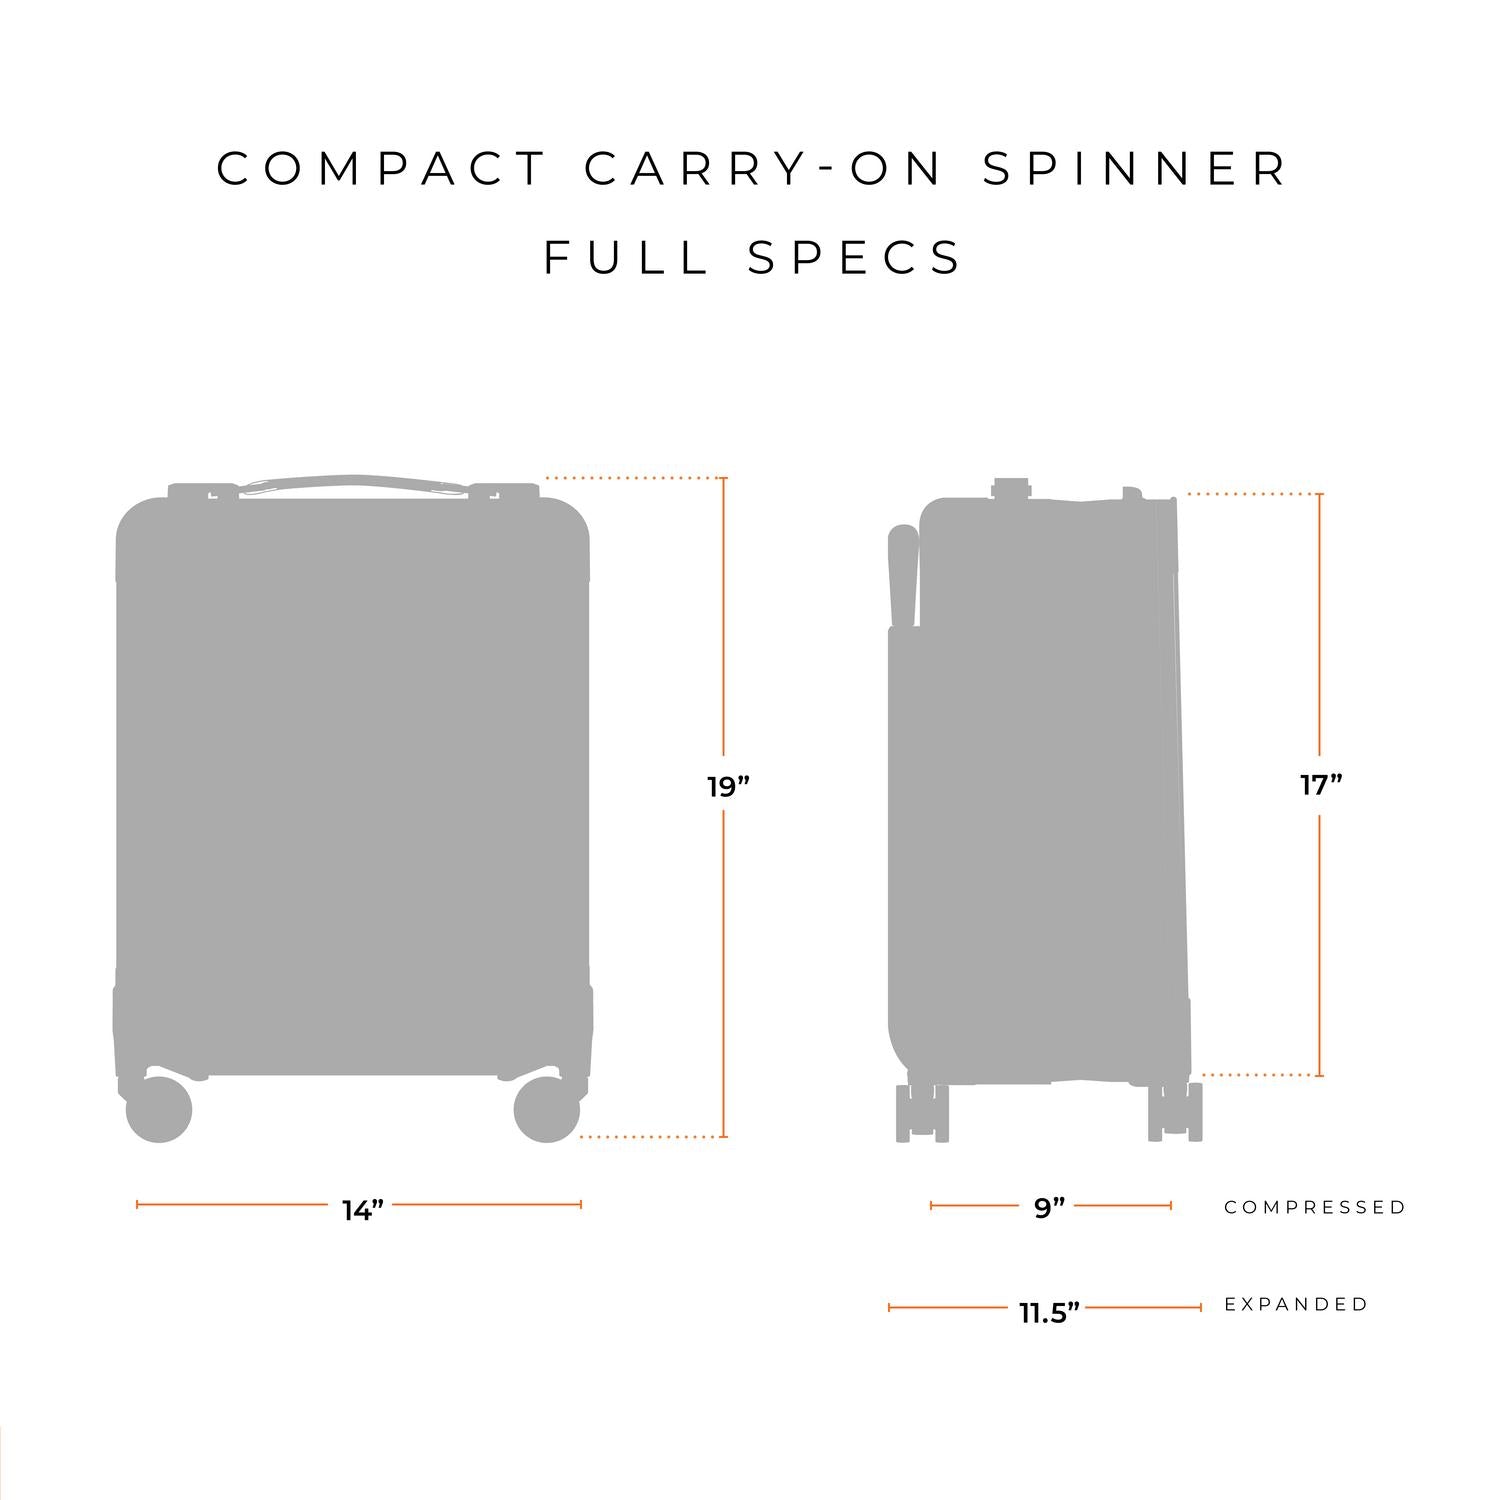 Briggs and Riley Compact Carry-On Spinner Full Specs, 14"x19"x9"(compressed) 11.5" (expanded) #color_black